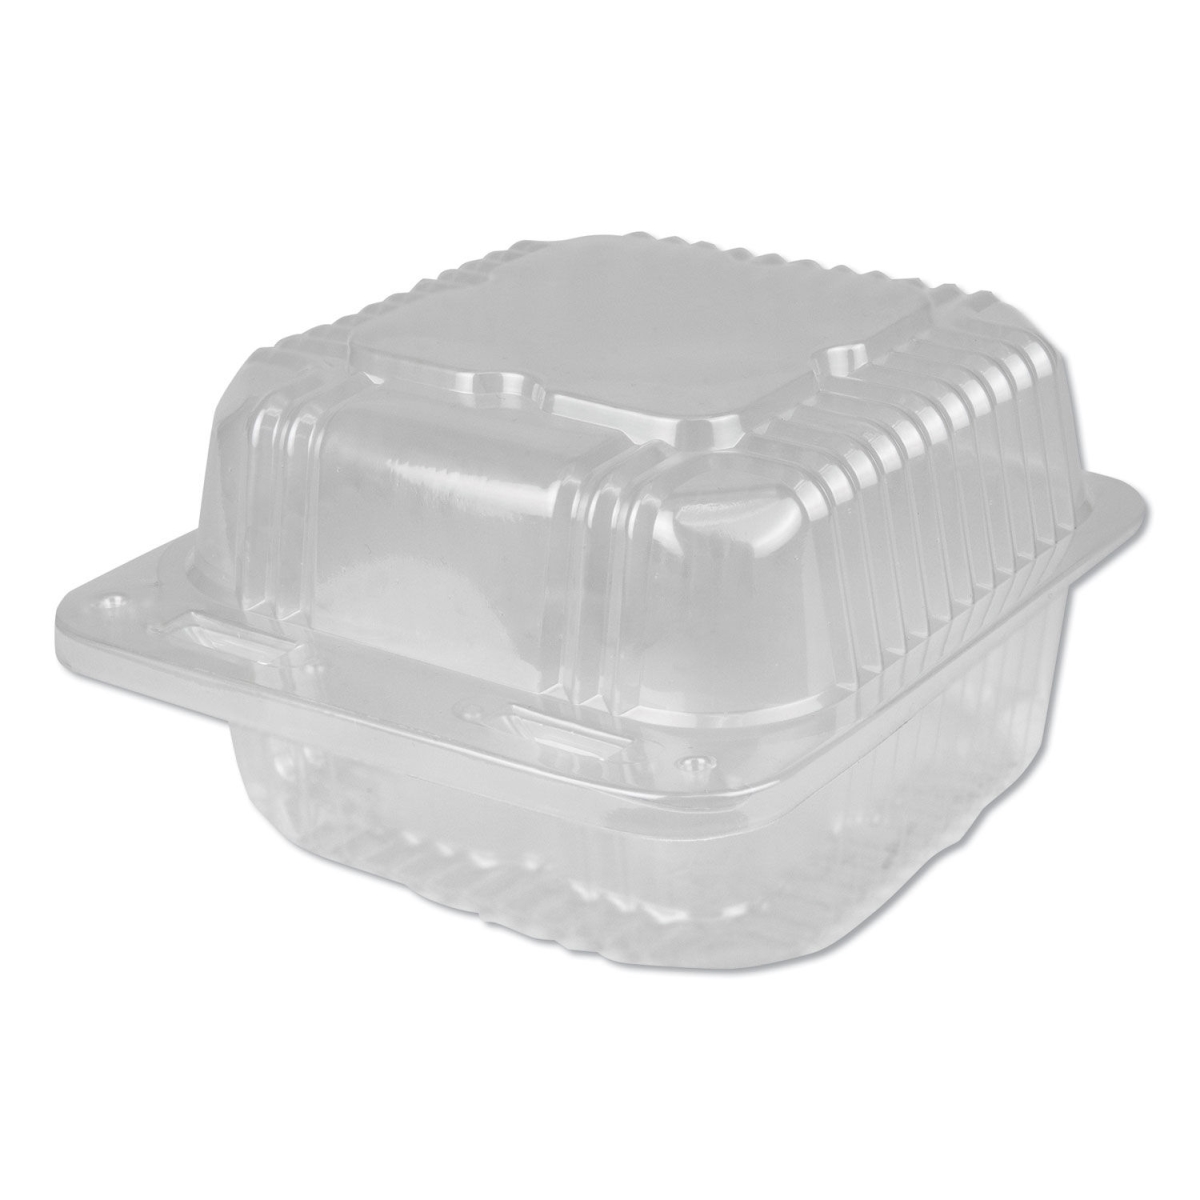 Dpkpxt11600 21 Oz 6 In. Plastic Square Containers, Clear